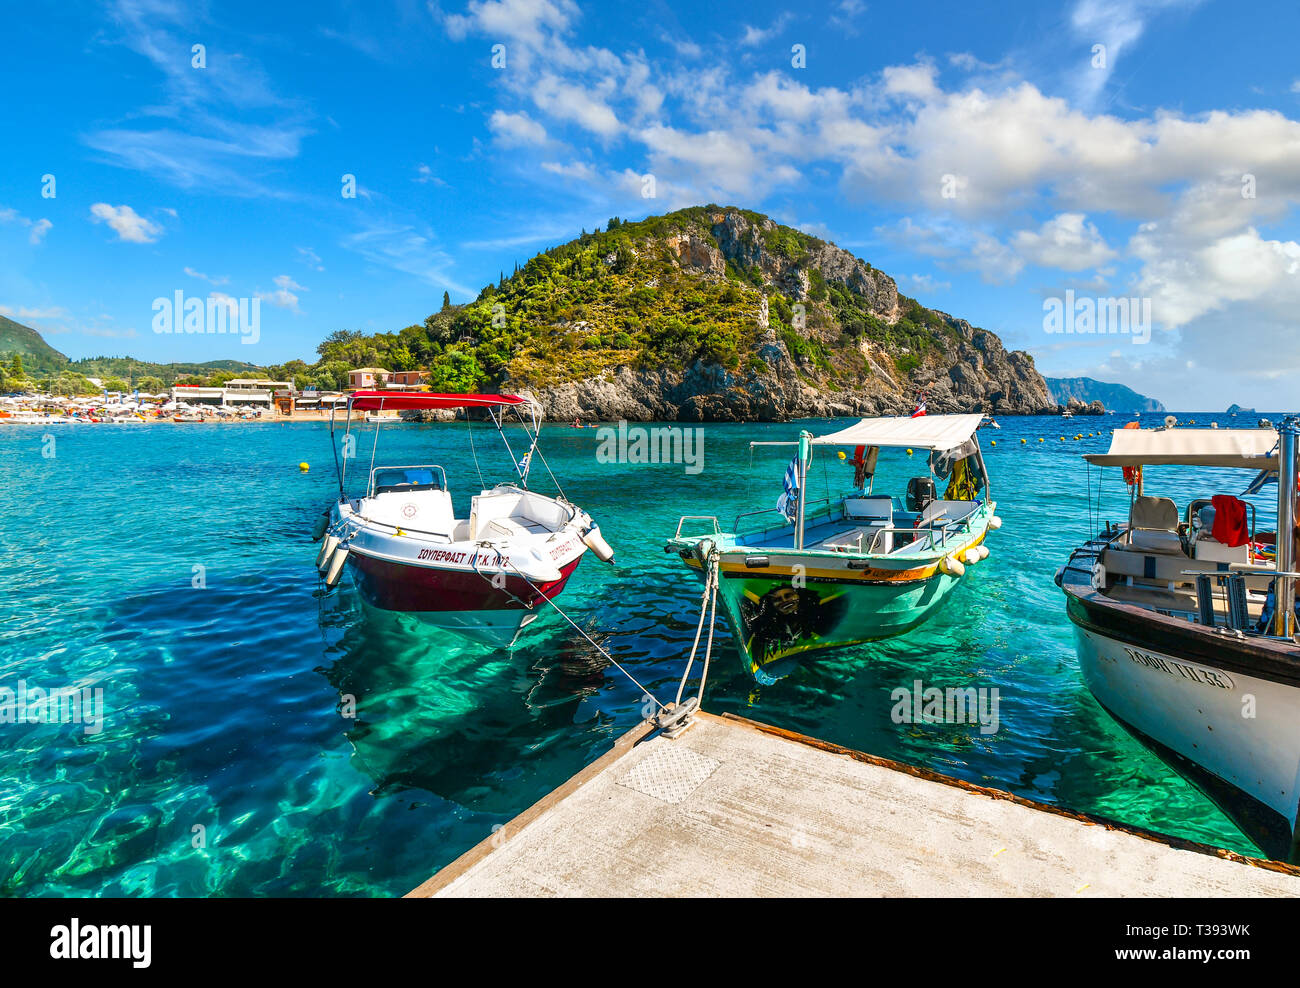 Boats docked in the crystal turquoise waters near the shore of the sandy Palaiokastritsa beach and bay on the Aegean island of Corfu, Greece. Stock Photo